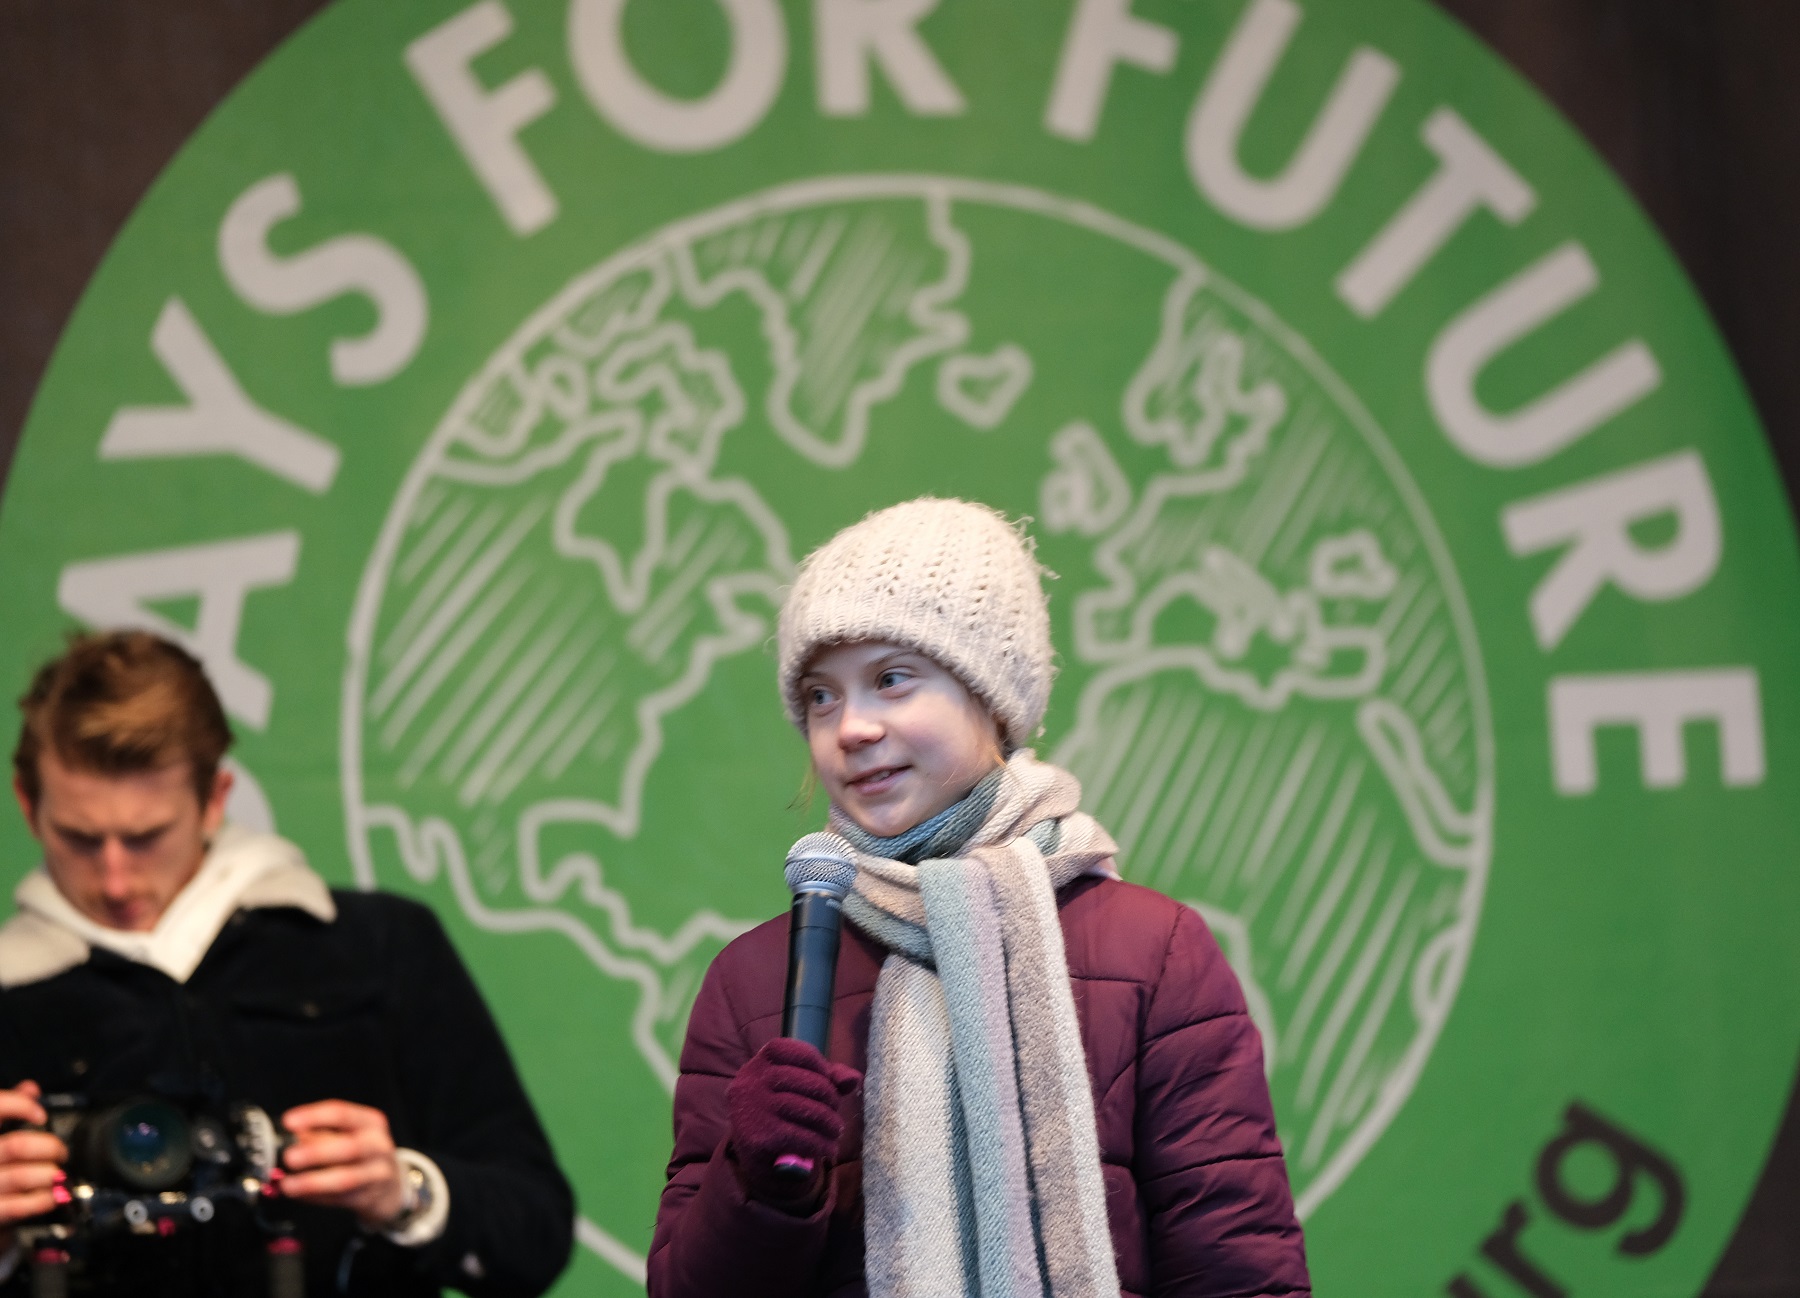 HAMBURG, GERMANY - FEBRUARY 21: Teenage climate activist Greta Thunberg speaks at a Fridays for Future climate protest on February 21, 2020 in Hamburg, Germany. The city-state of Hamburg is scheduled to hold elections on February 23 and climate politics are likely to play a significant role in the outcome. (Photo by Sean Gallup/Getty Images)